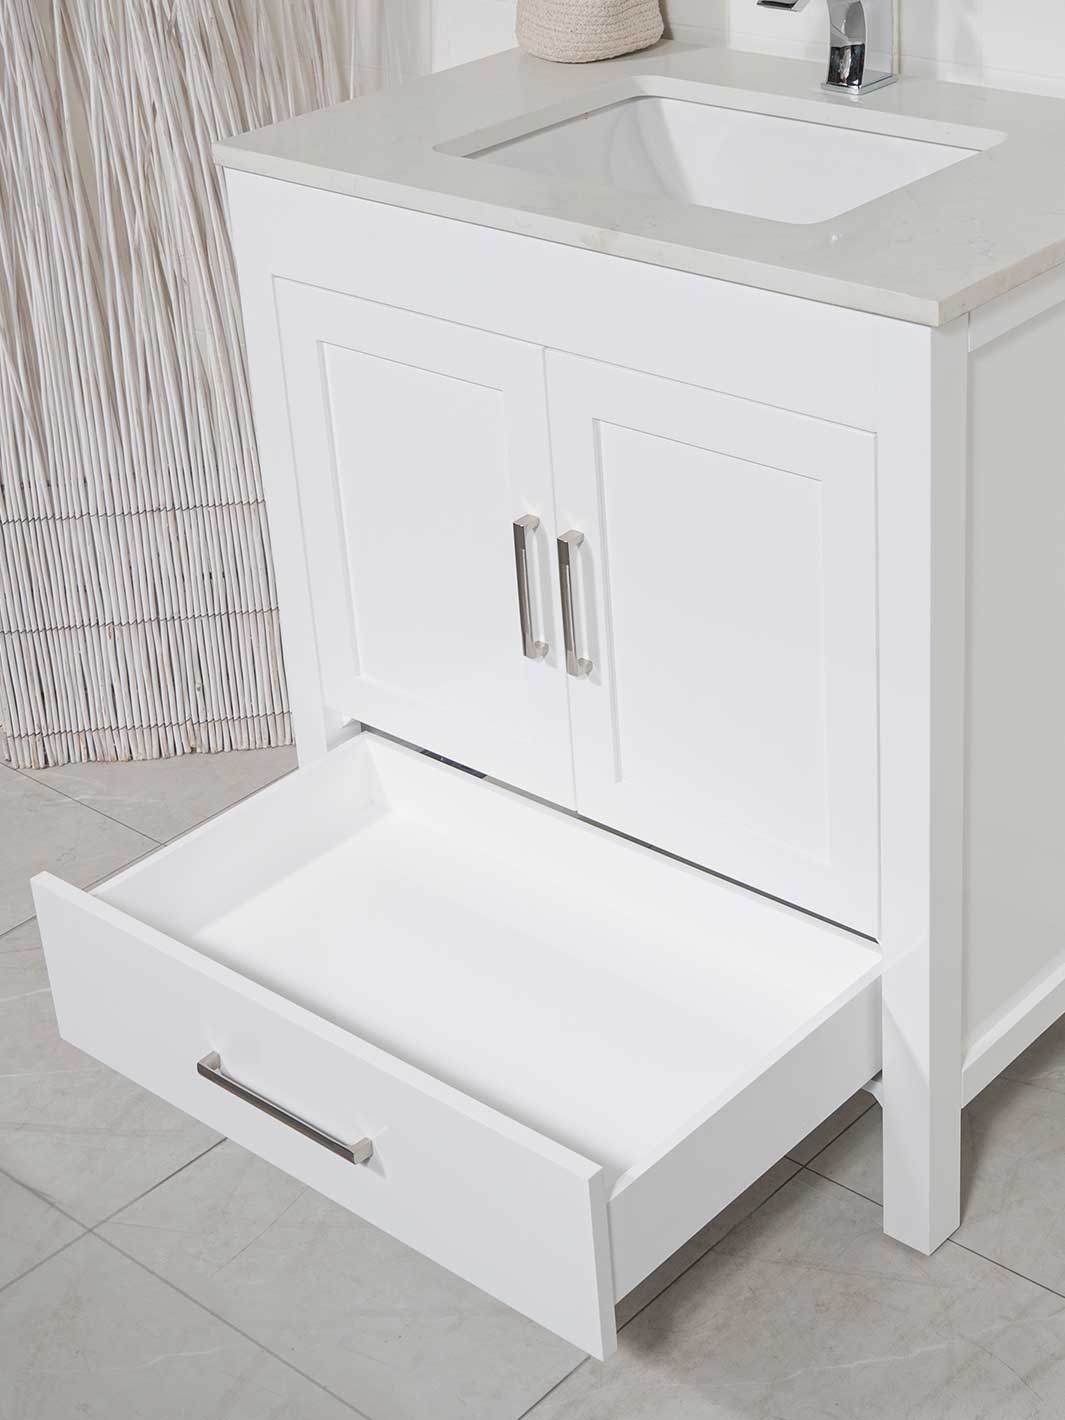 32 inch white bathroom vanity with bottom drawer, quartz counter, and chrome faucet